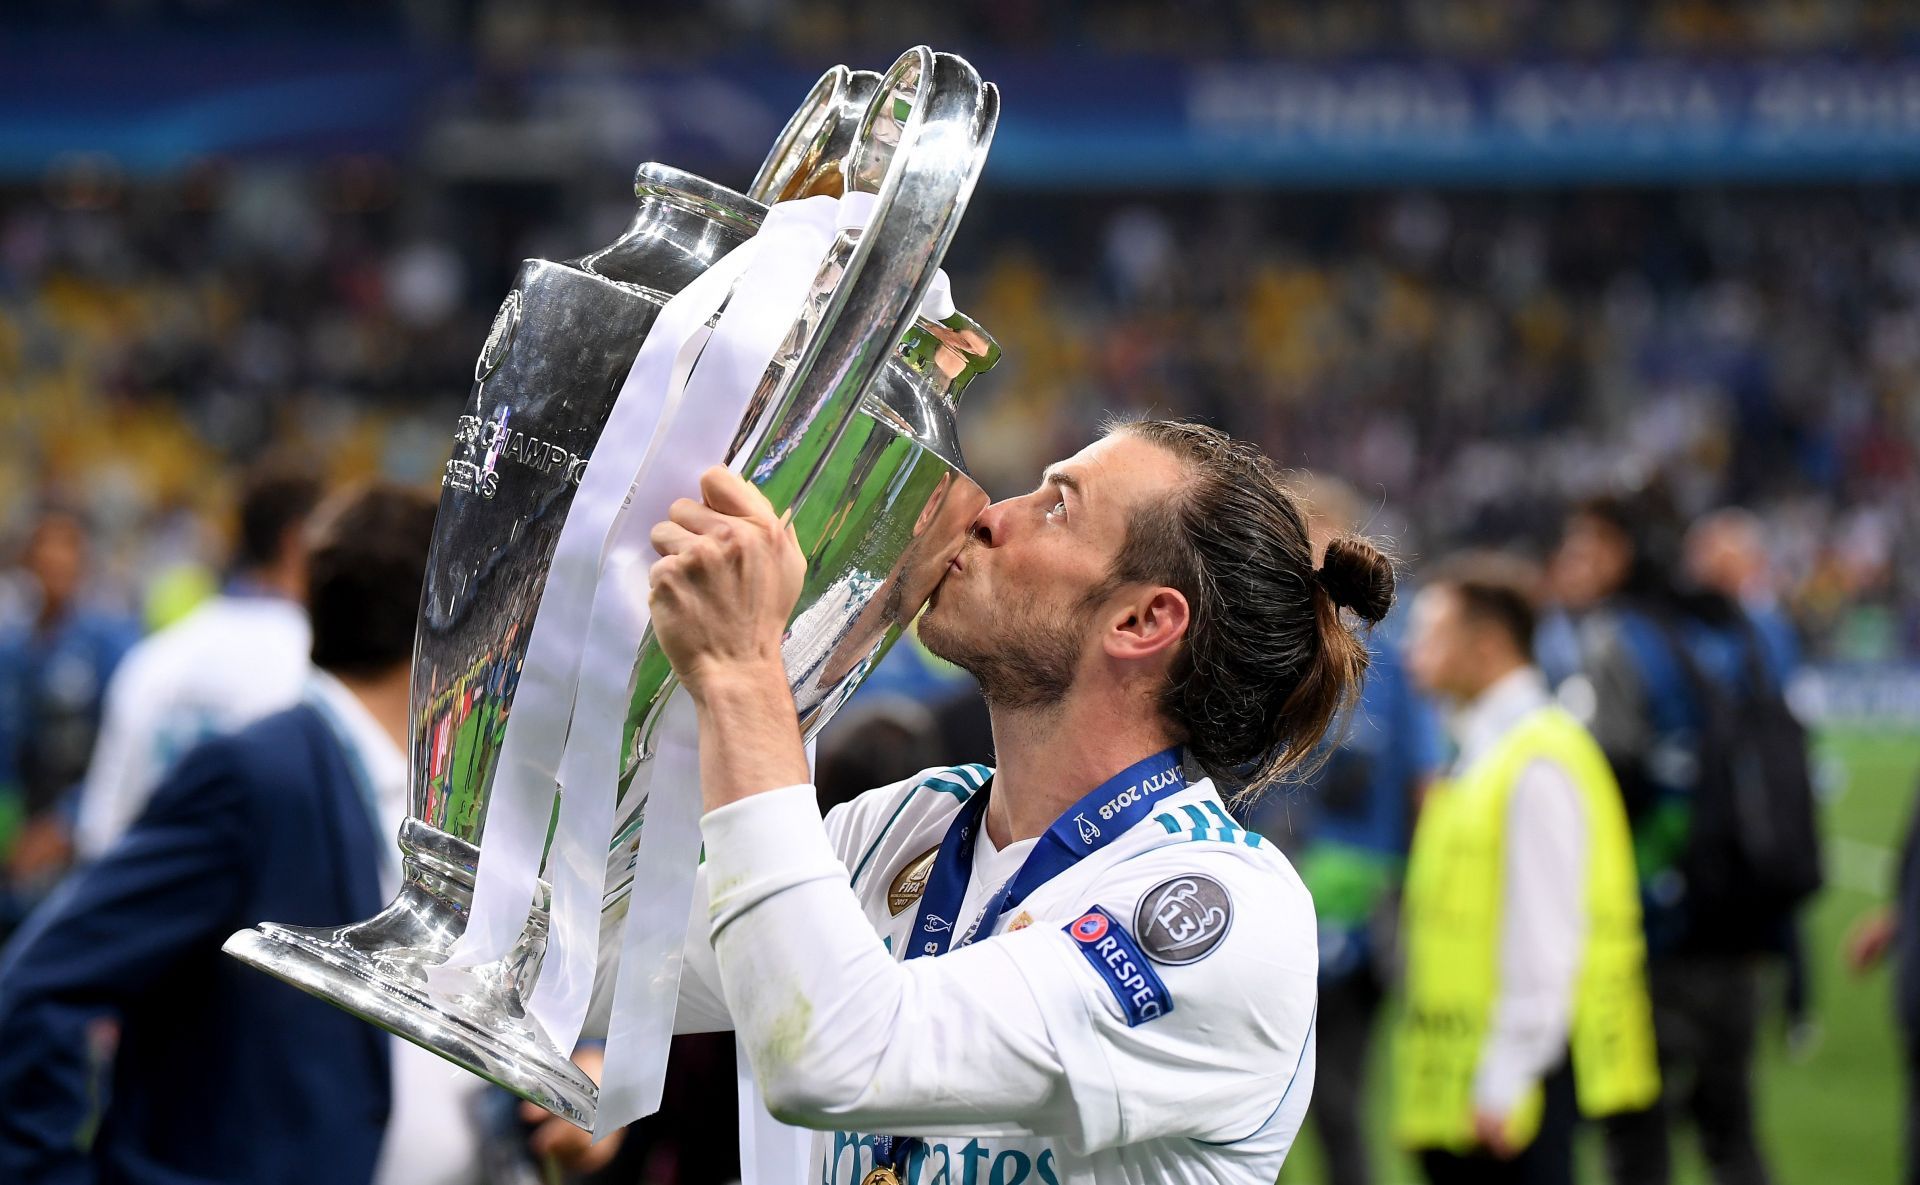 Gareth Bale has won the UEFA Champions League four times with Real Madrid